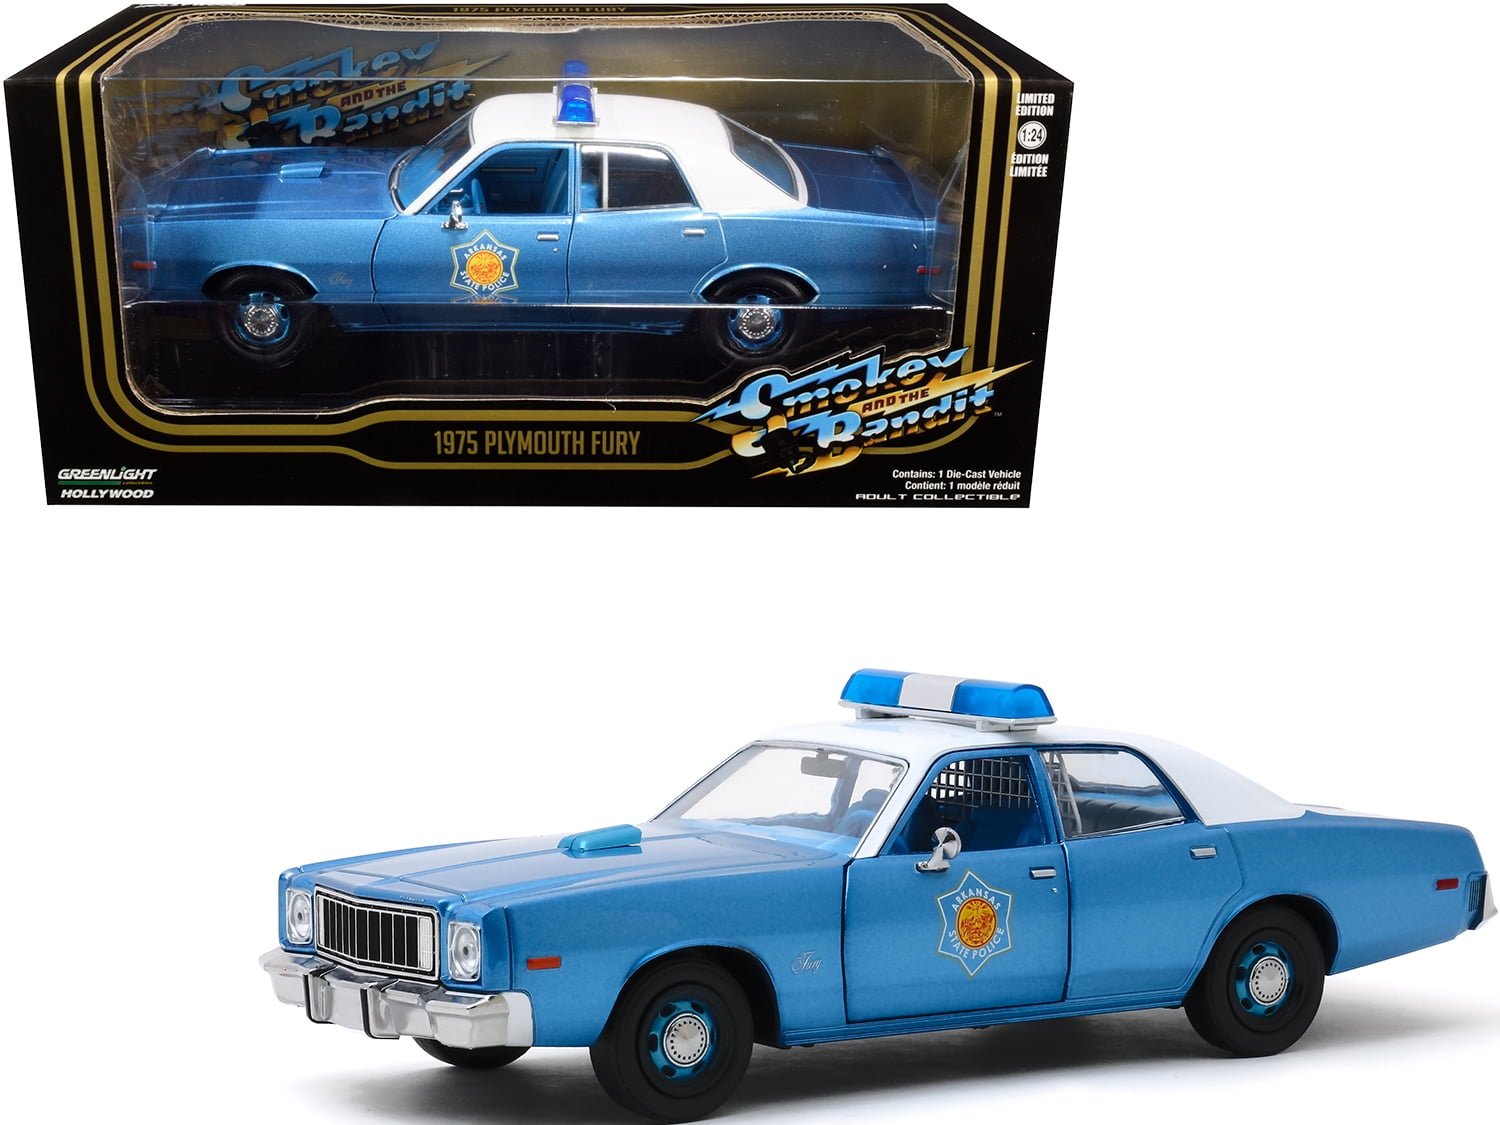 1975 Plymouth Fury Mississippi Highway Patrol Smokey and The Bandit Greenlight for sale online